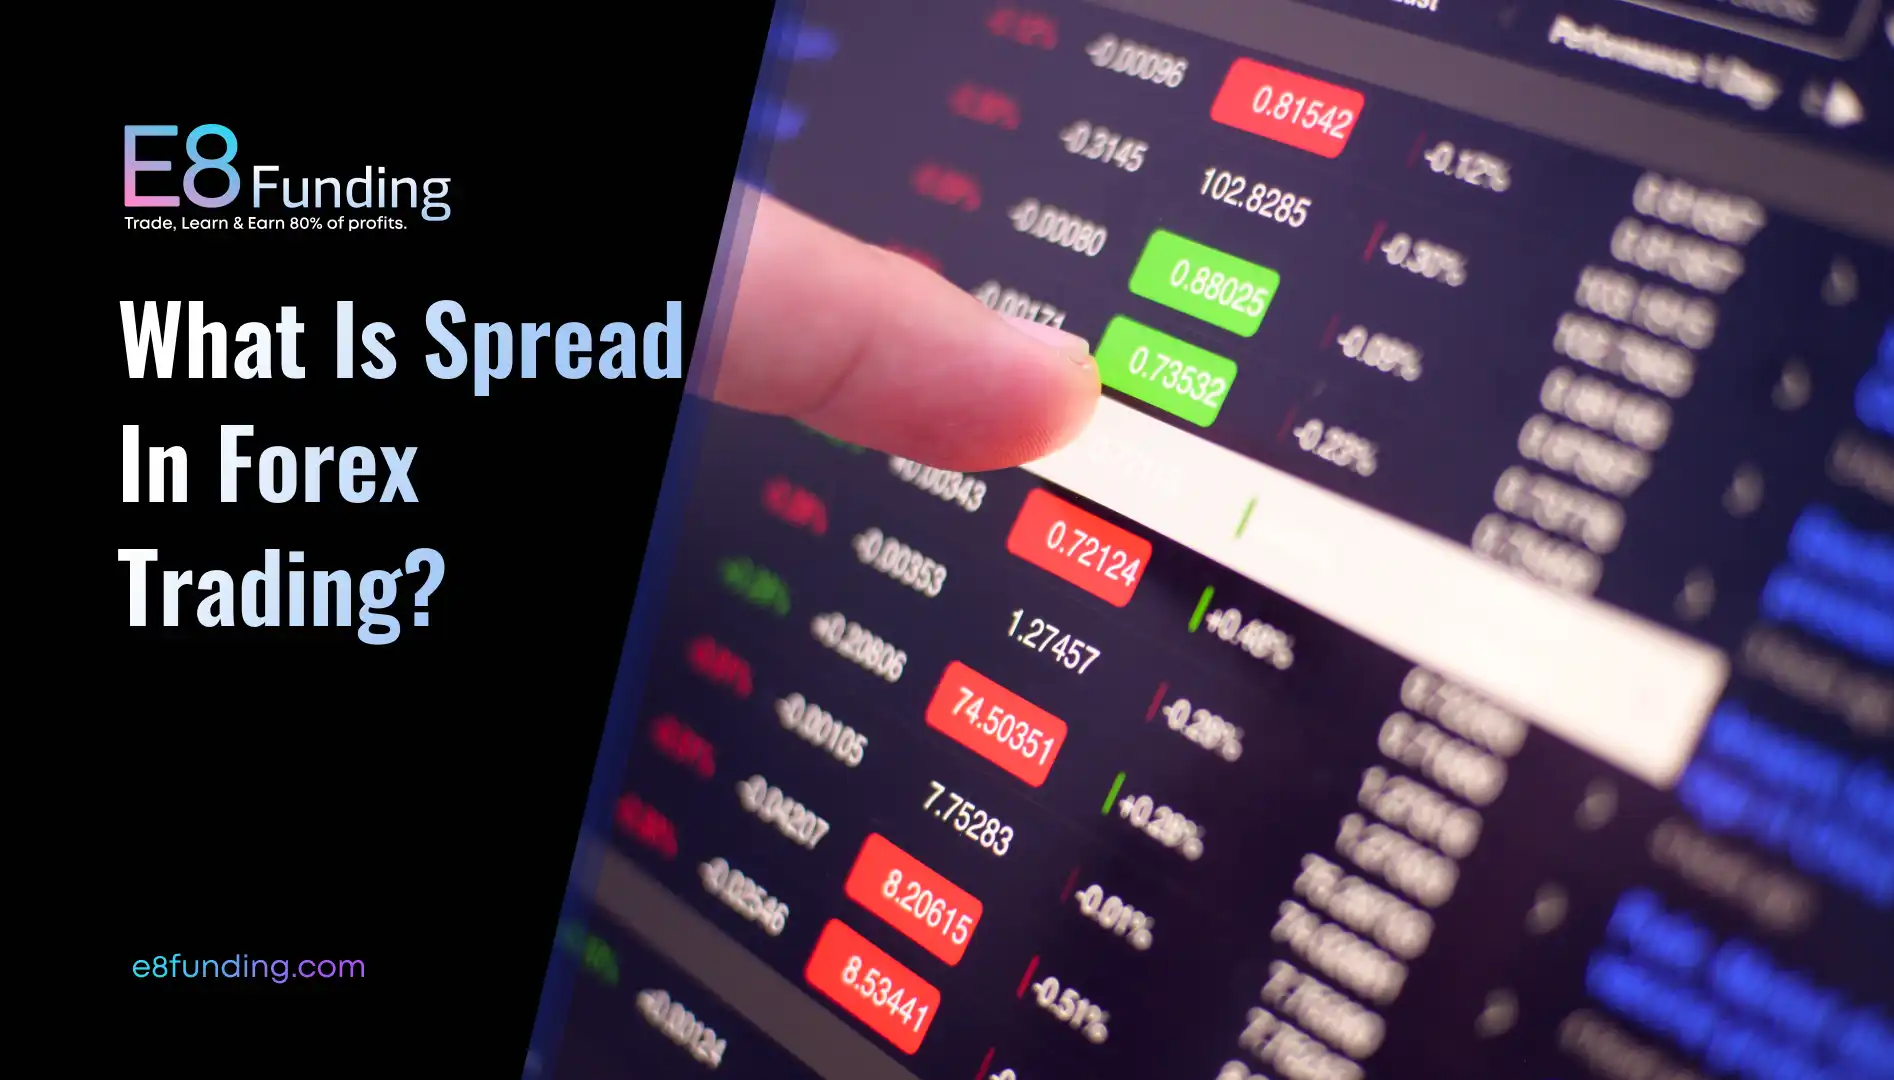 What is a Spread in Forex Trading and How Does it Affect Profits?